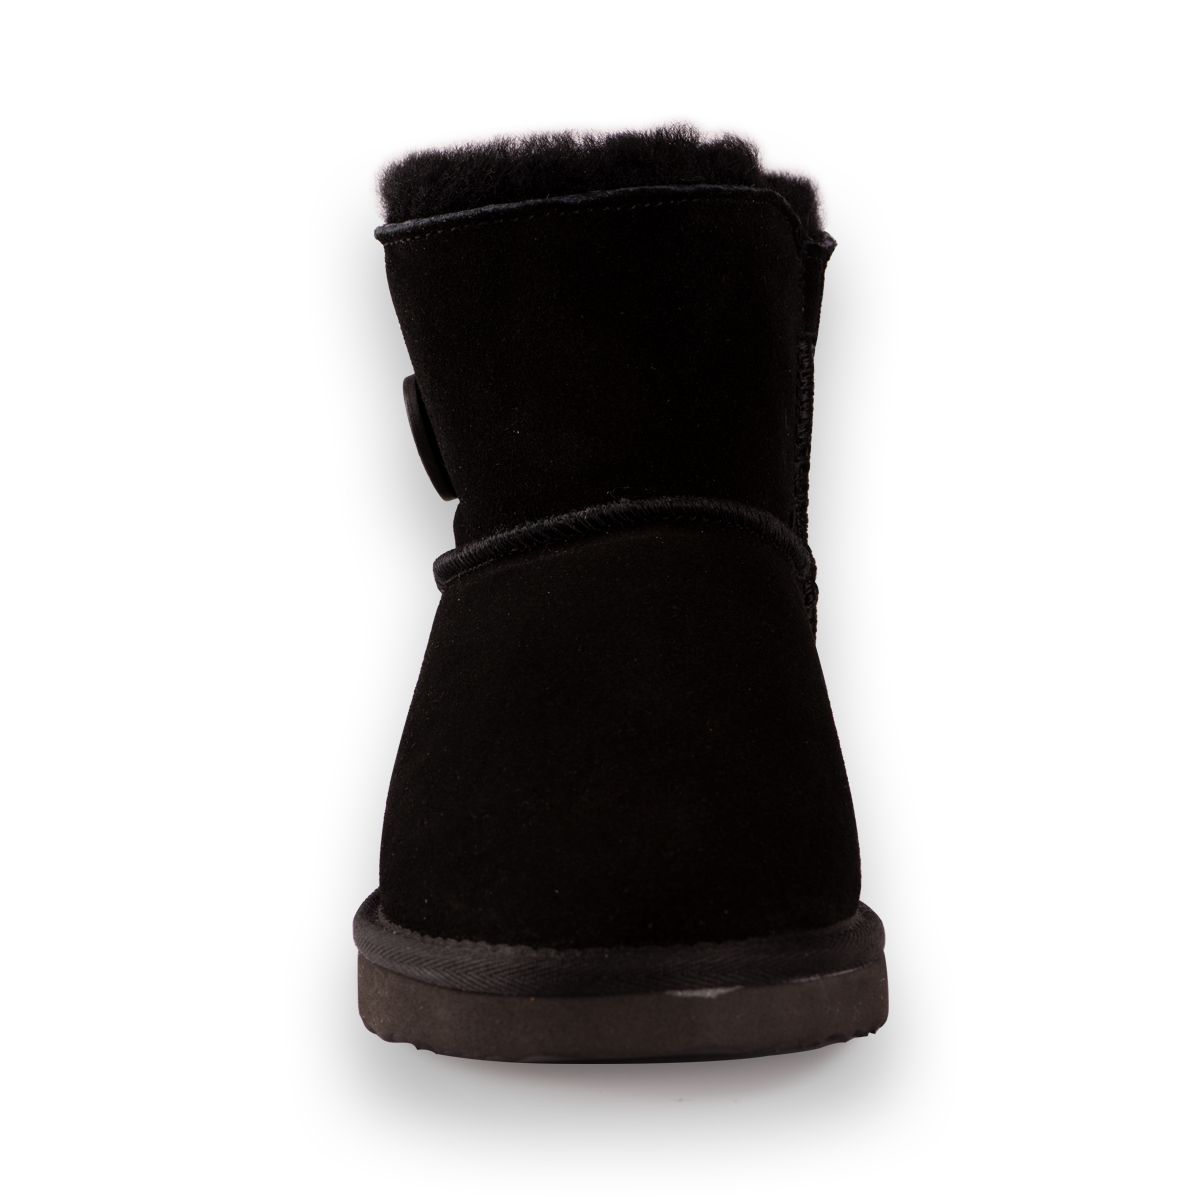 Button featured sheepskin boot – easy to slip on

Full leather Suede upper -Water Resistant
Soft premium genuine Australian Sheepskin wool lining 
Sustainably sourced and eco-friendly processed 
Unisex boots – button trim for that extra fashion kick 
Rubber High-density EVA blend outsole - making it lighter, softer and more durable 
Double stitching and reinforced heel 
Sheepskin breathes allowing feet to stay warm in winter and cool in summer 
100% brand new and high quality, comes in a branded box, suitable for a gift